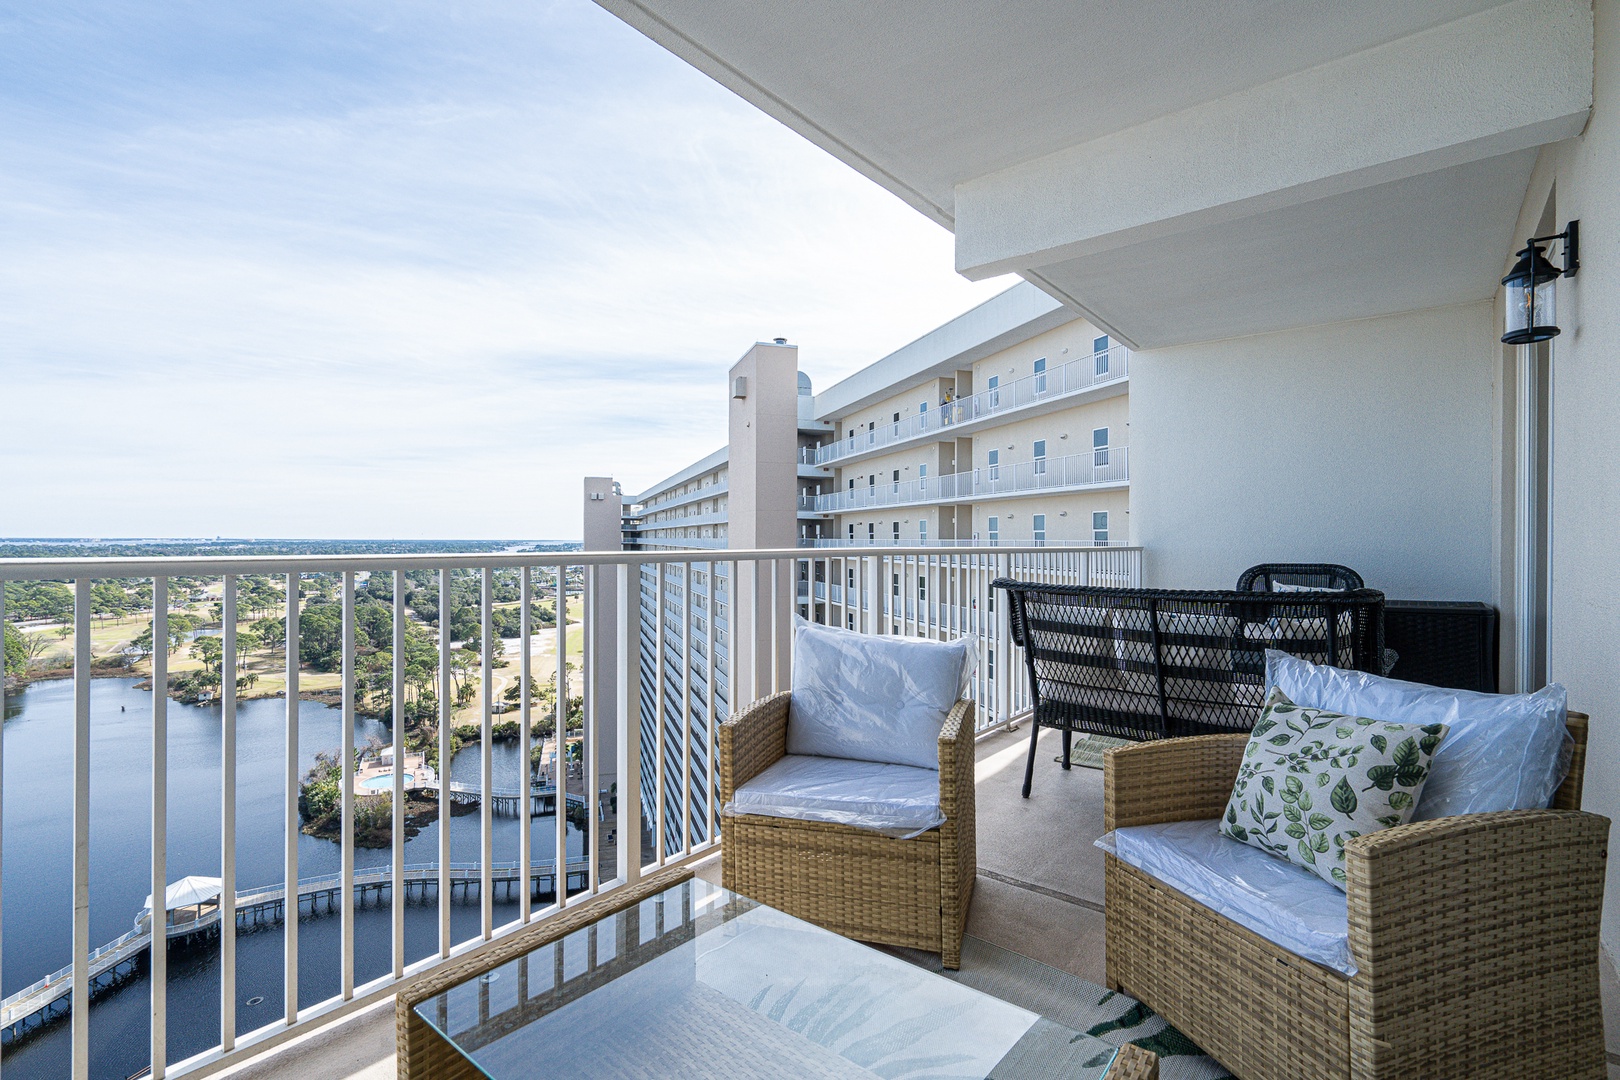 Step onto the balcony & lounge or dine with gorgeous panoramic views